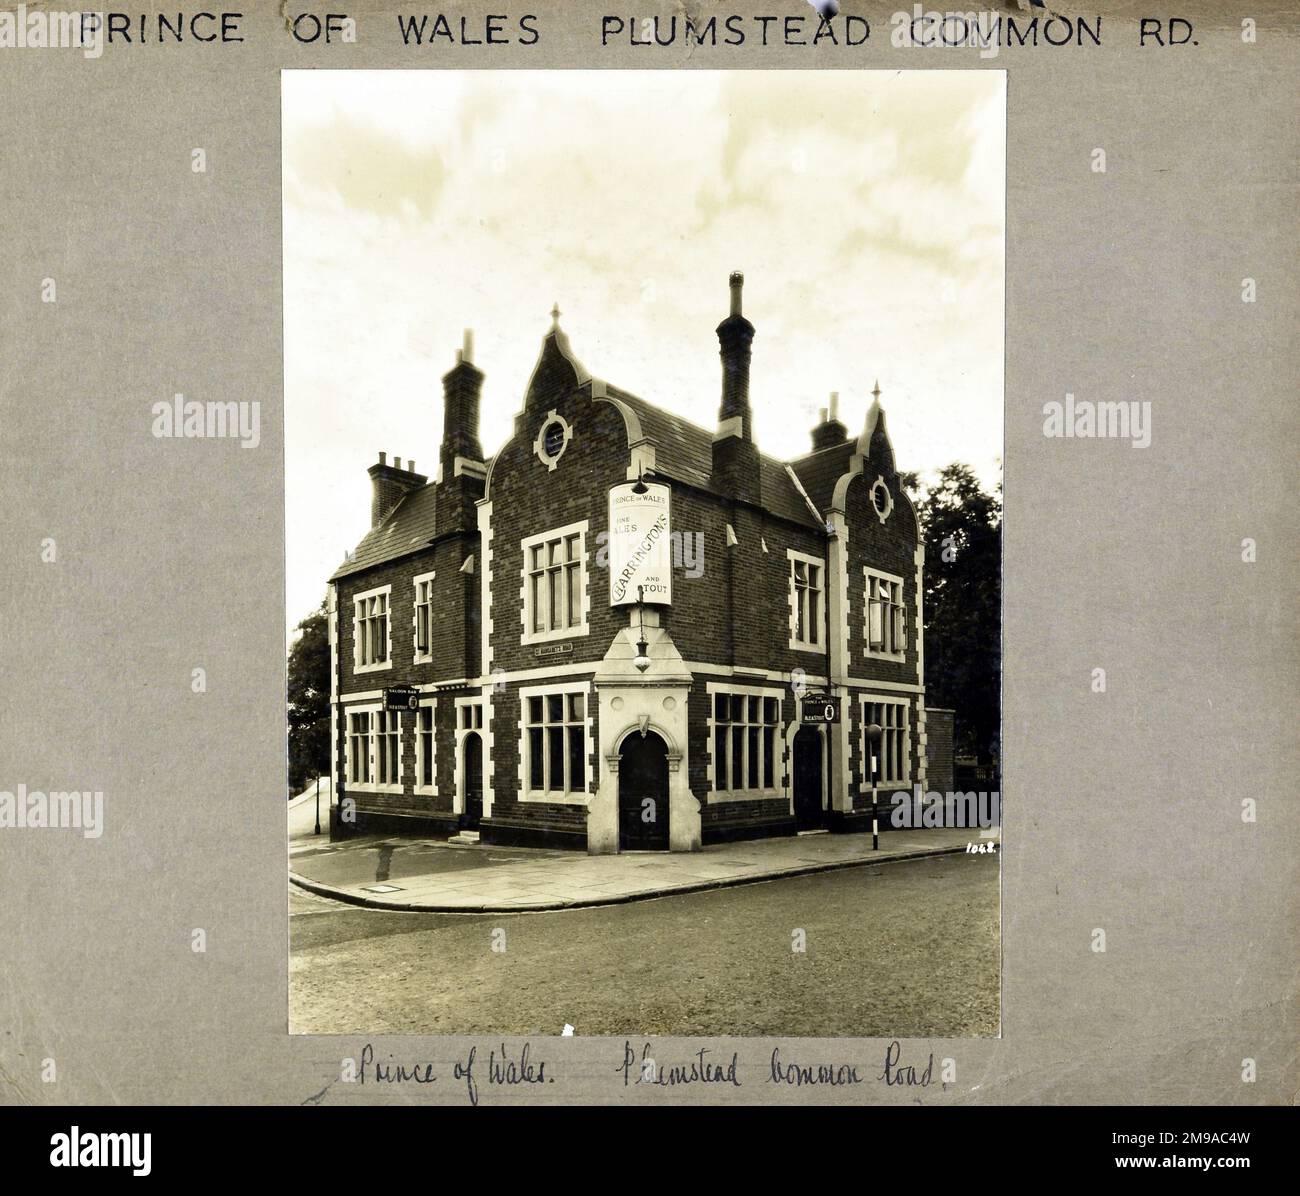 Photograph of Prince Of Wales PH, Plumstead, London. The main side of the print (shown here) depicts: Corner on view of the pub.  The back of the print (available on request) details: Nothing for the Prince Of Wales, Plumstead, London SE18 3AU. As of July 2018 . Now in residential use Stock Photo